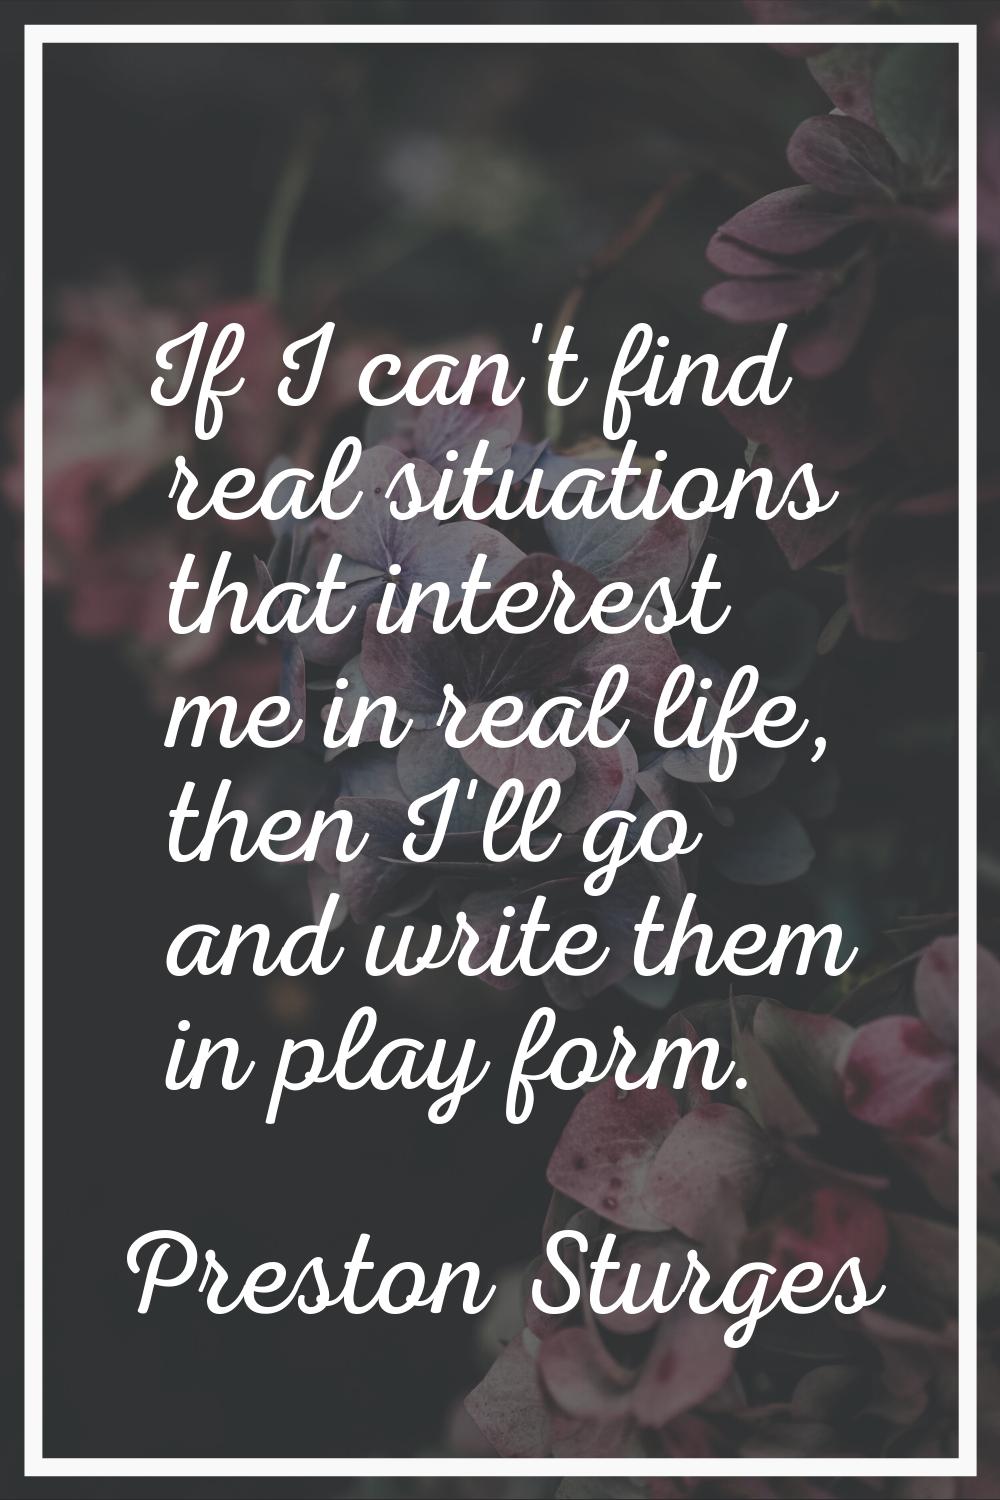 If I can't find real situations that interest me in real life, then I'll go and write them in play 